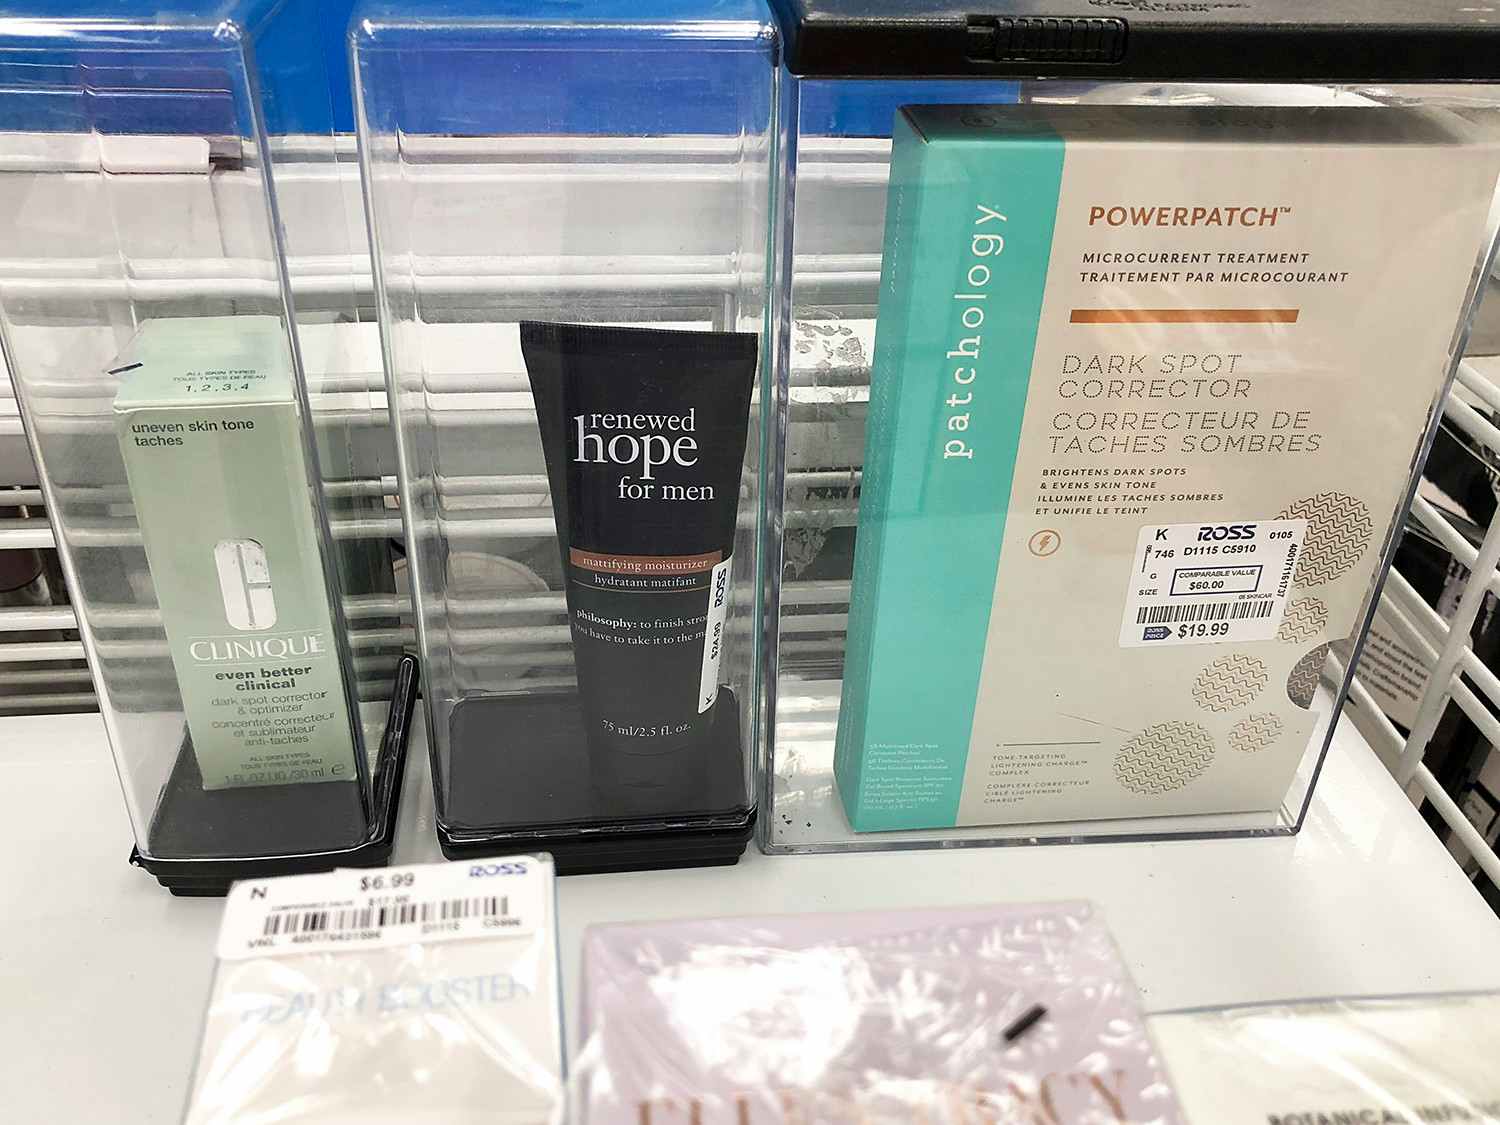 Clinique and Patchology products cheaper at Ross than Sephora and Ulta